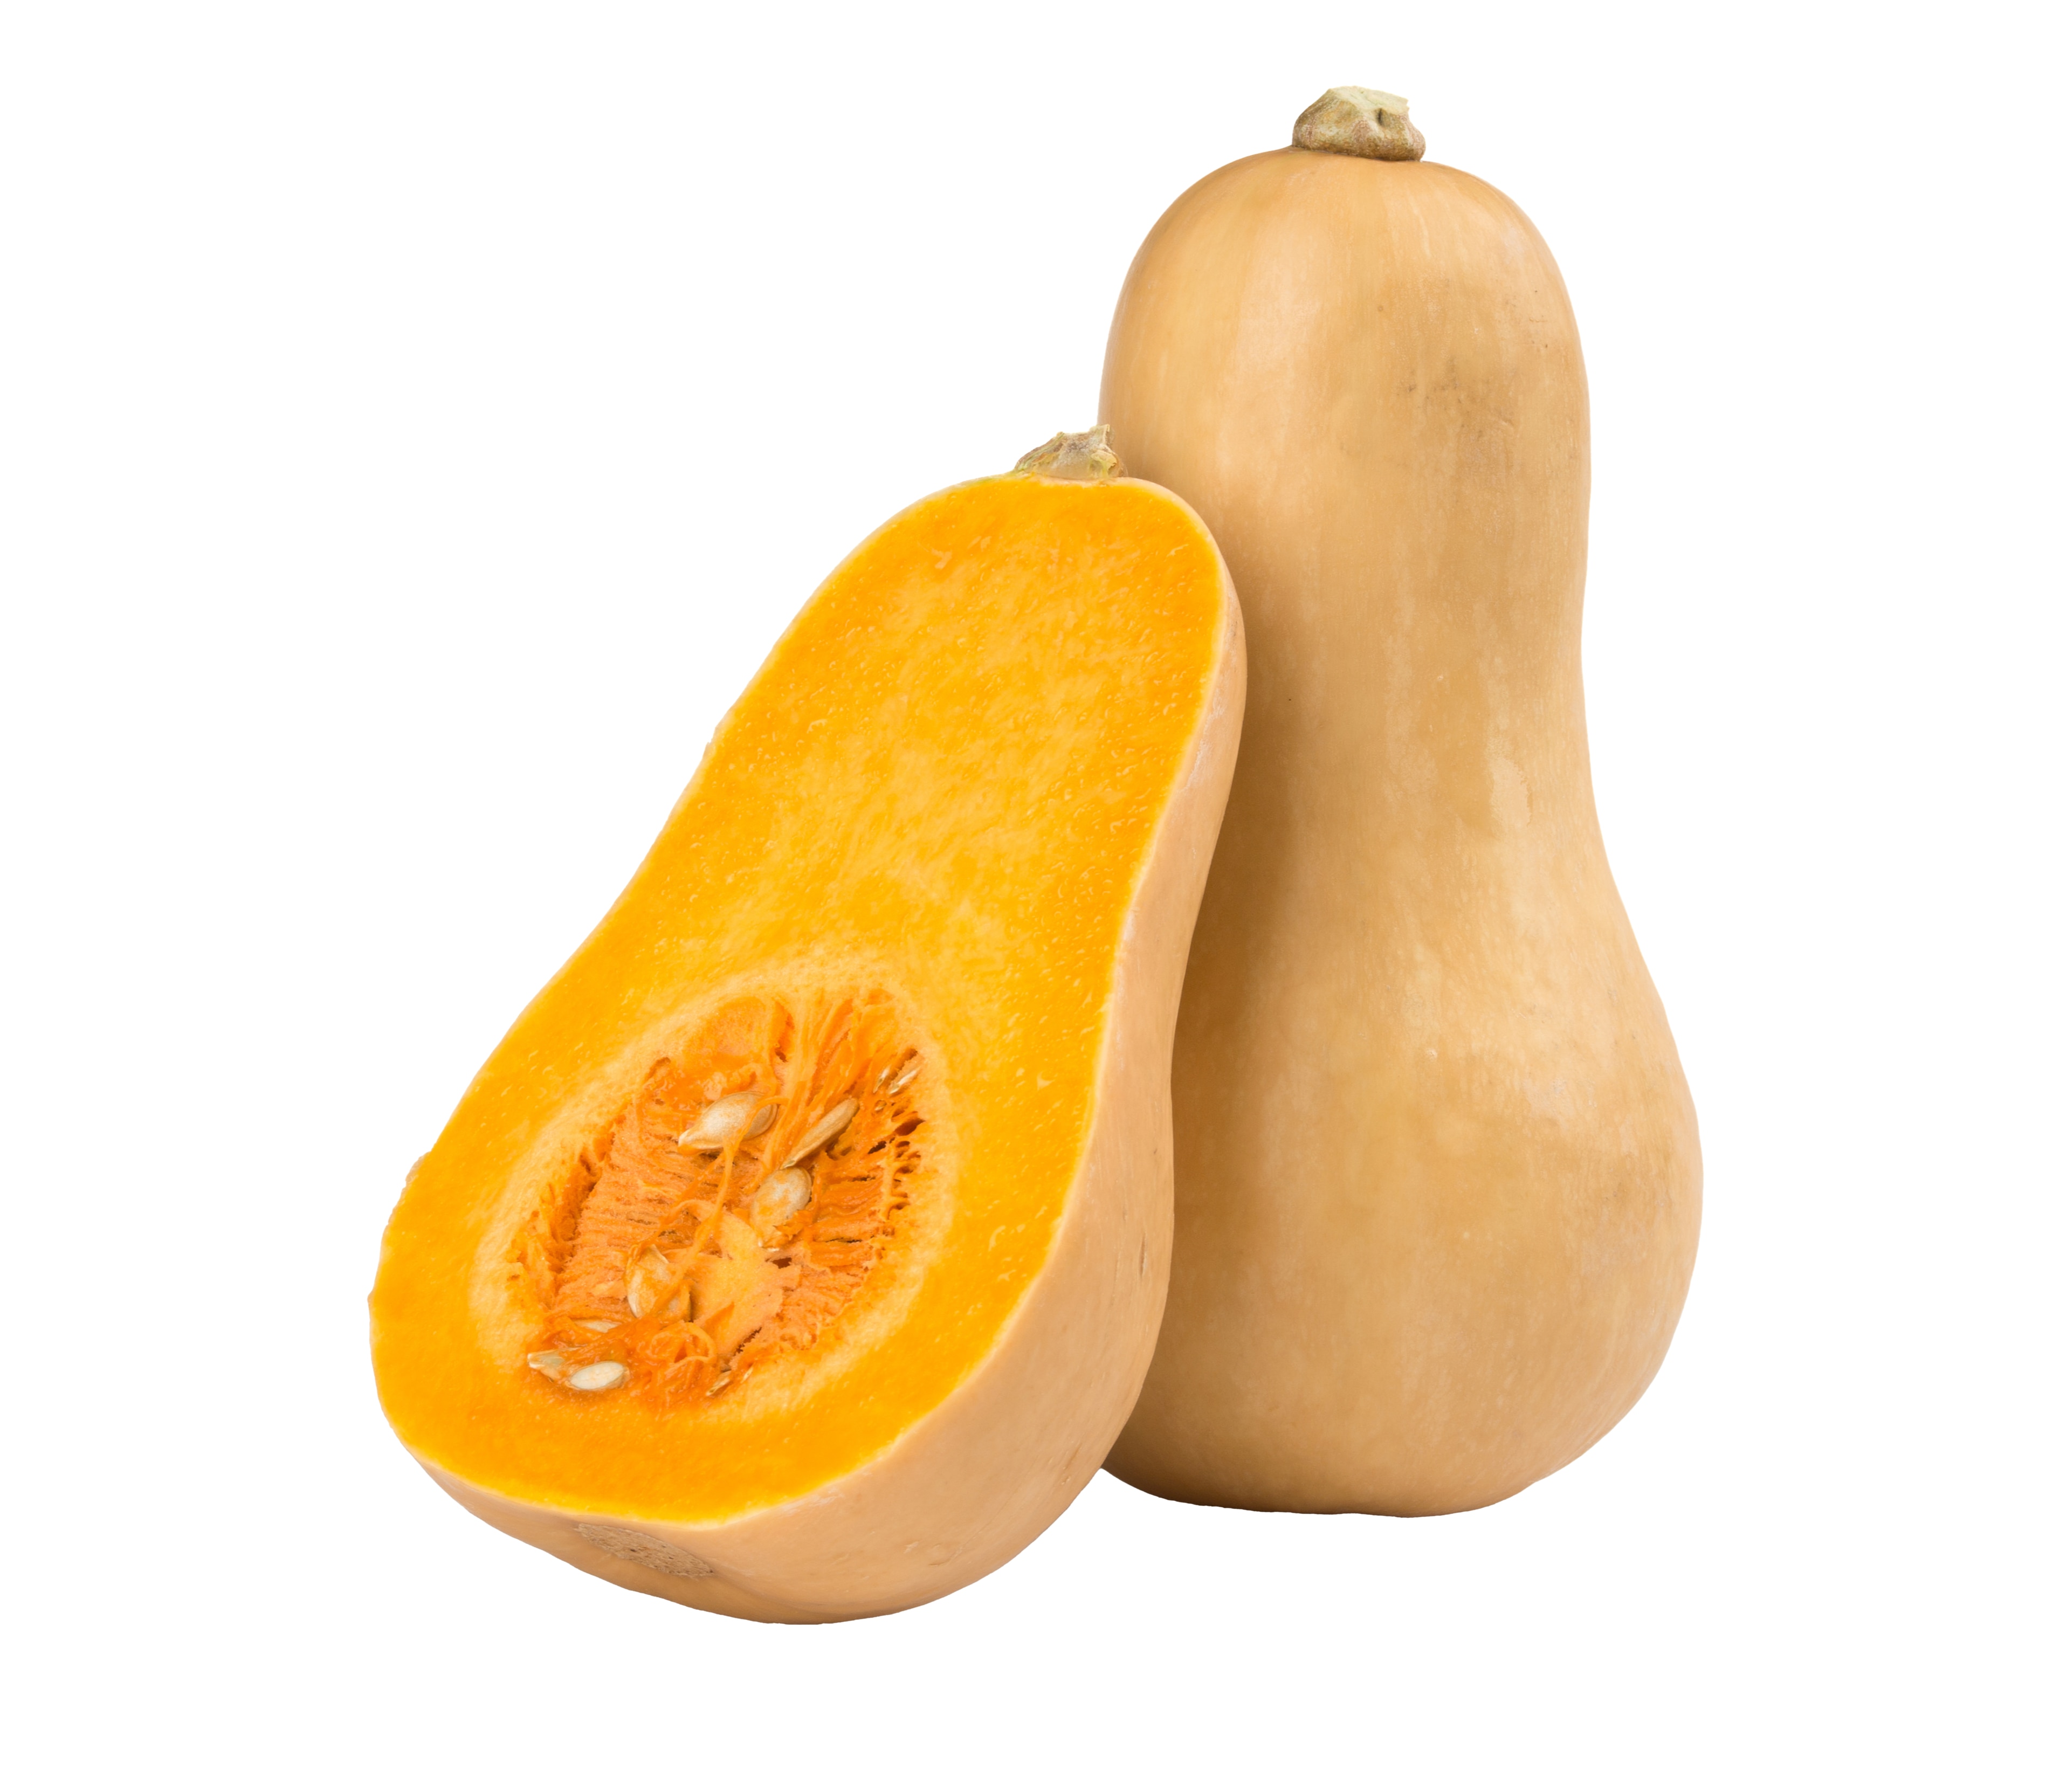 Waltham butternut Seed Variety from Royal Seed